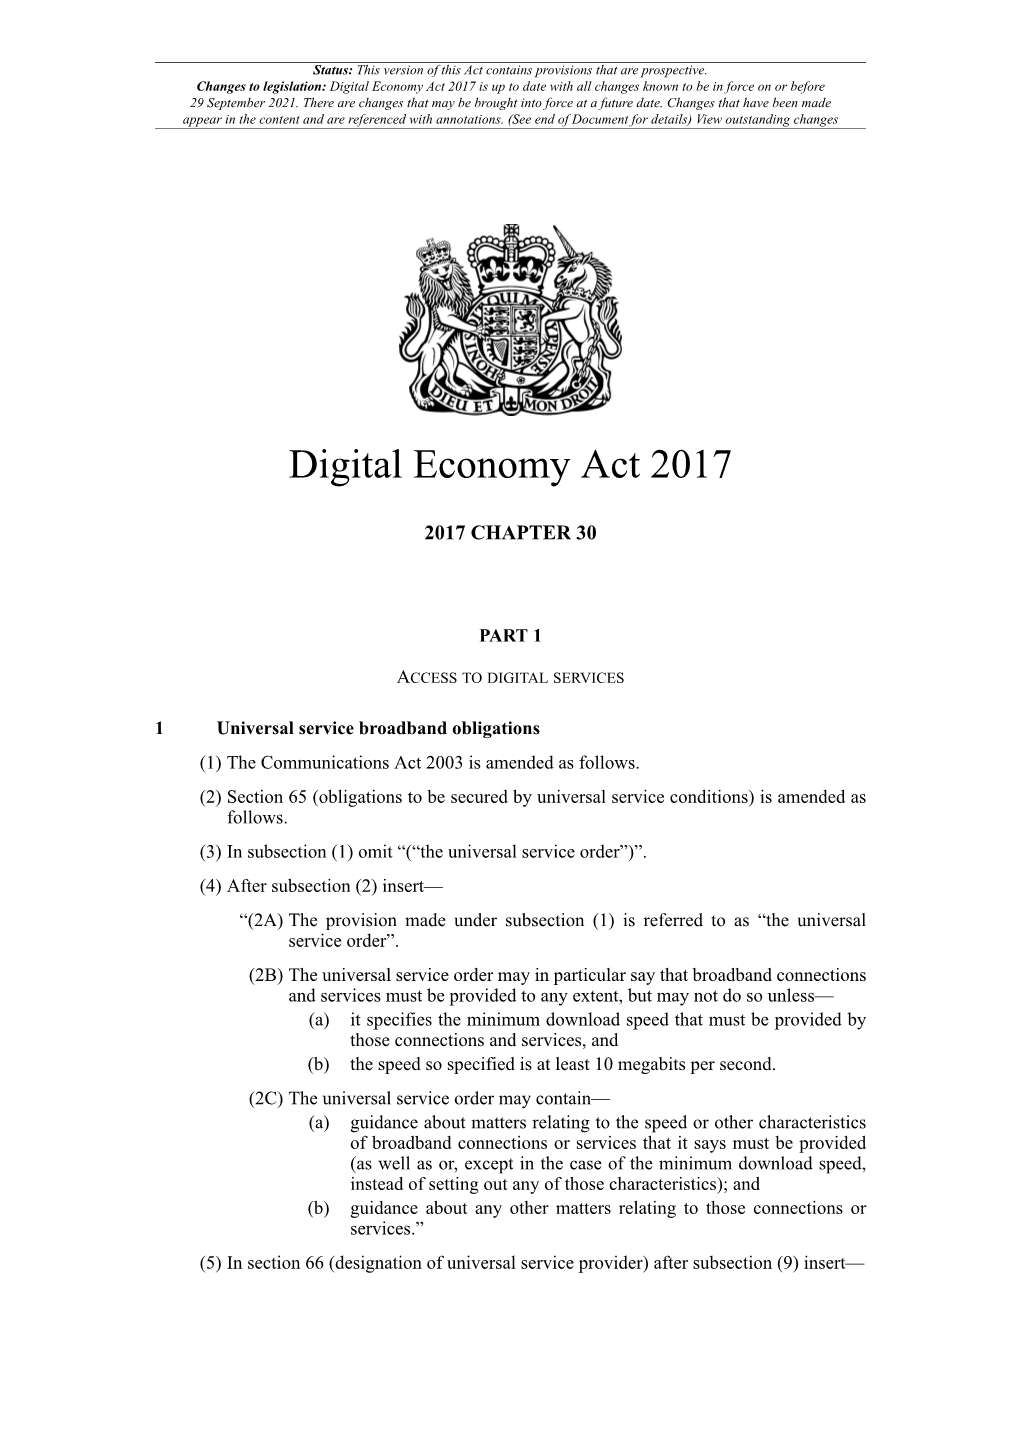 Digital Economy Act 2017 Is up to Date with All Changes Known to Be in Force on Or Before 29 September 2021